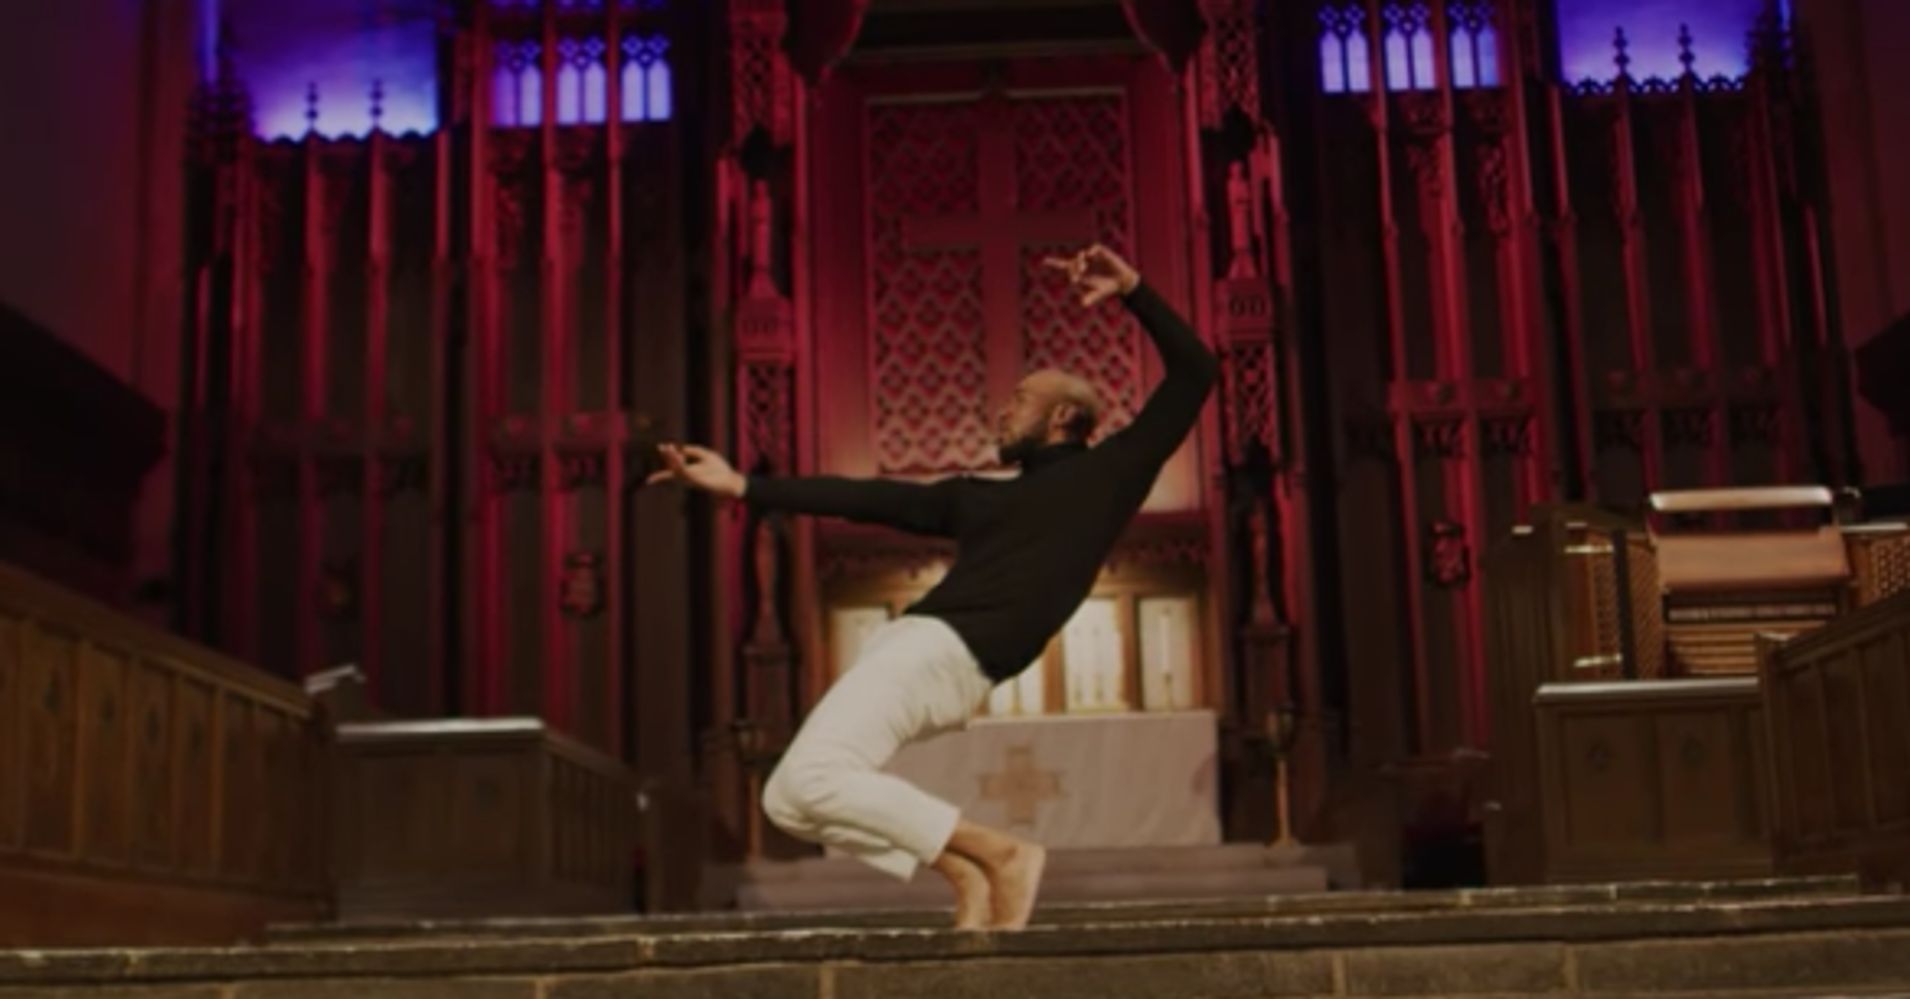 This Stunning Dance Video Is A Heartfelt Plea For Queer Acceptance Huffpost